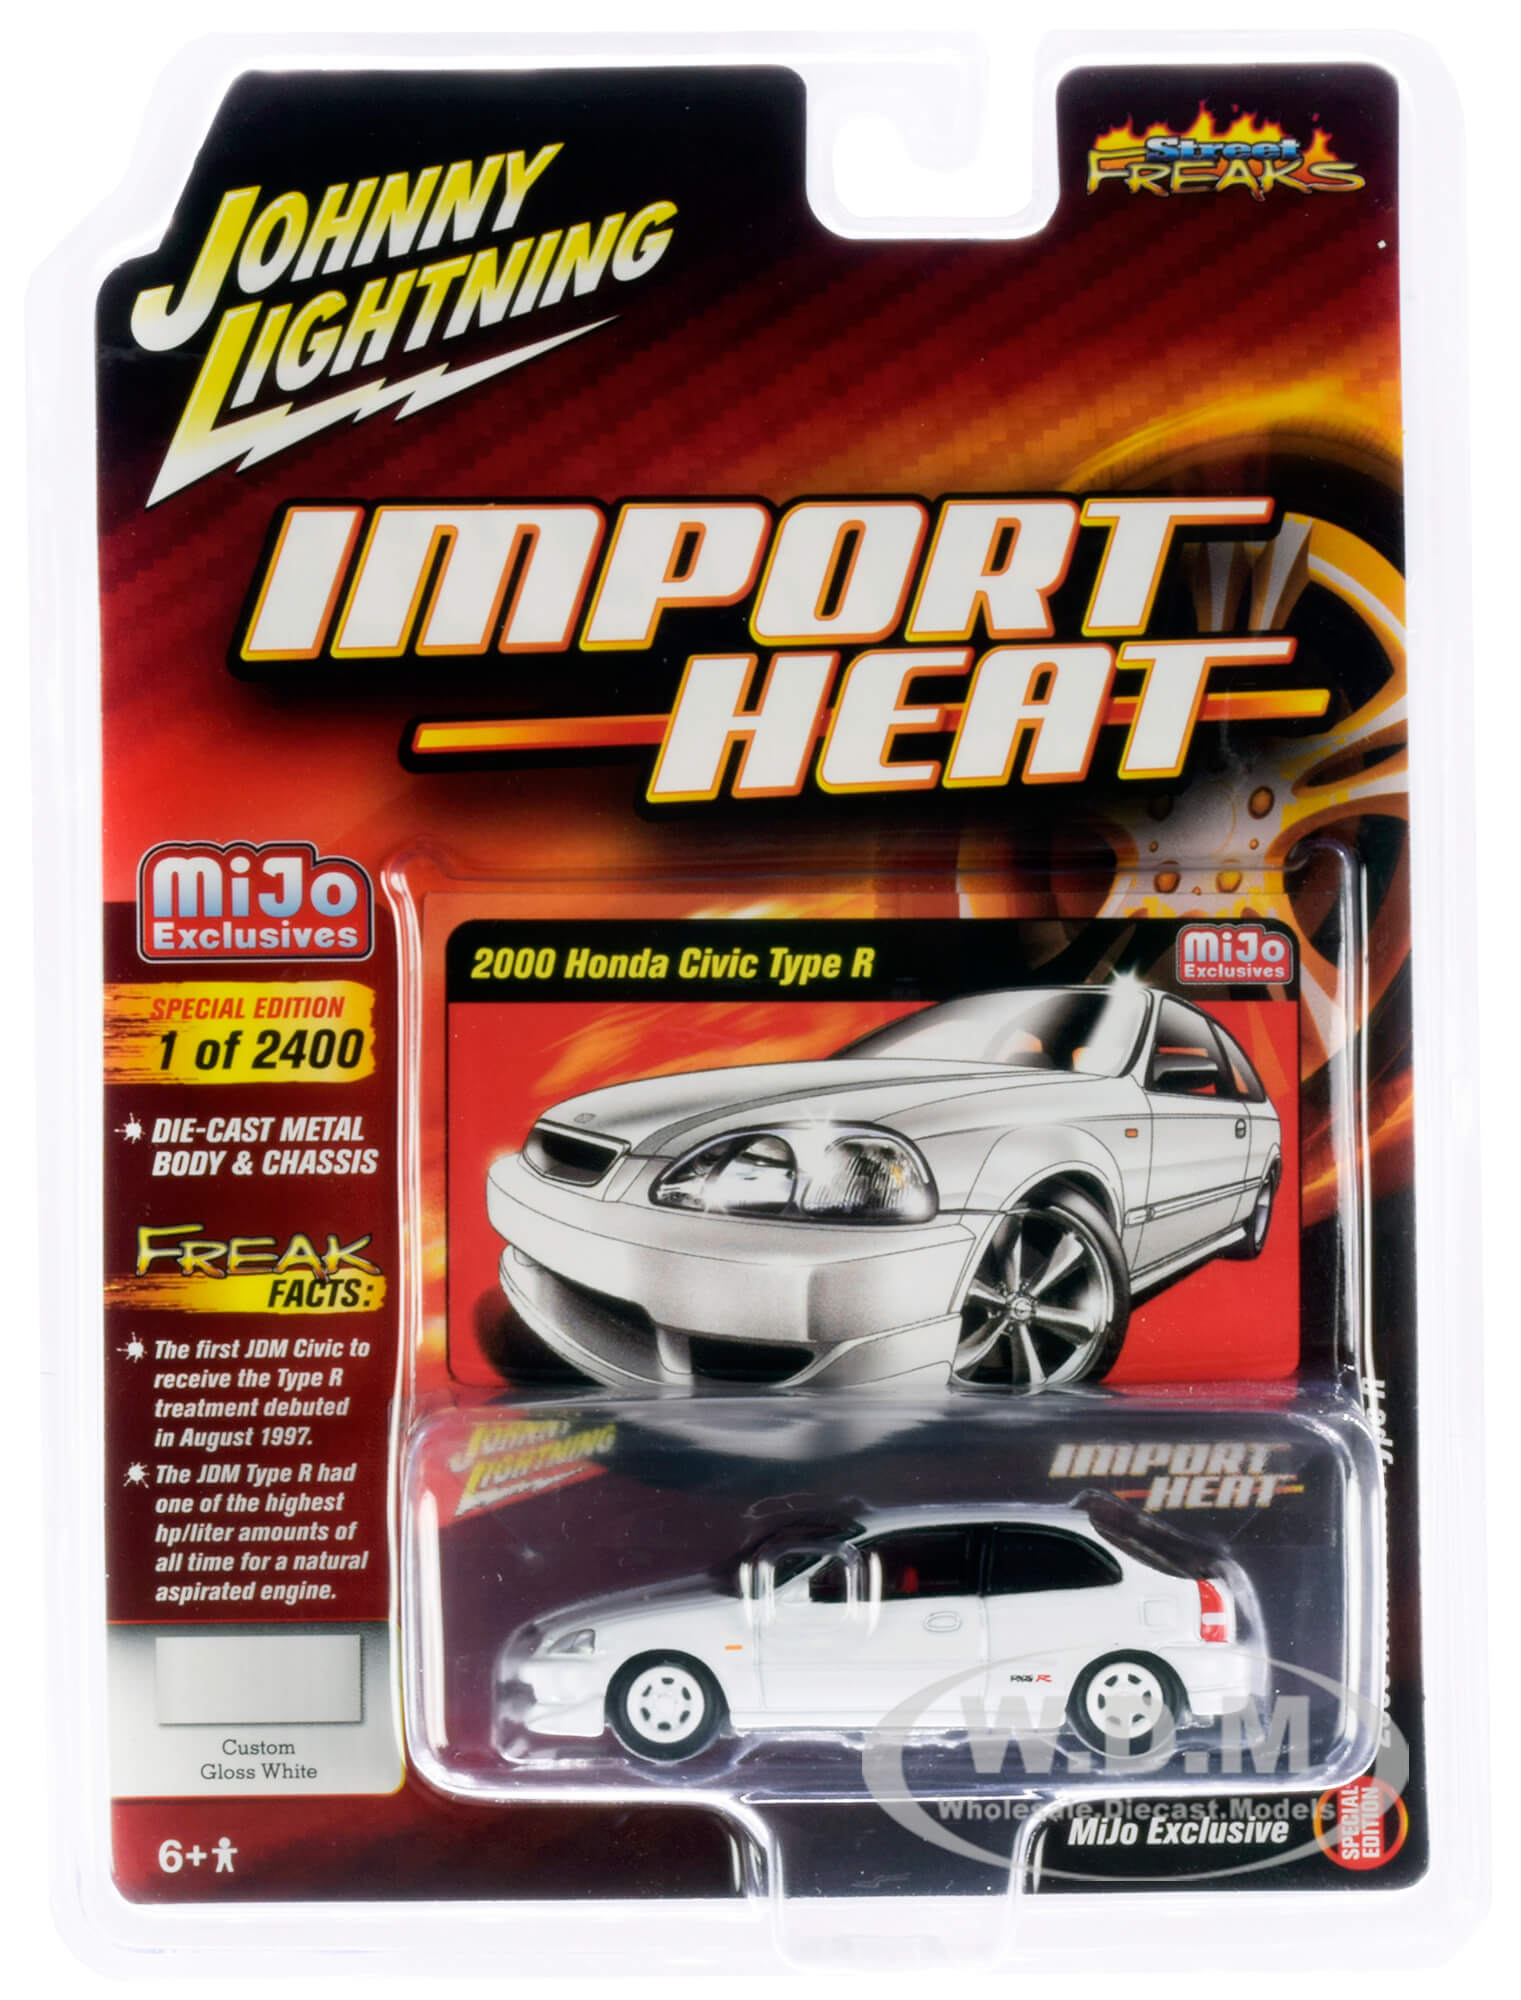 2000 Honda Civic Type R White with White Wheels and Red Interior Import Heat Street Freaks Series Limited Edition to 2400 pieces Worldwide 1/64 Diecast Model Car by Johnny Lightning